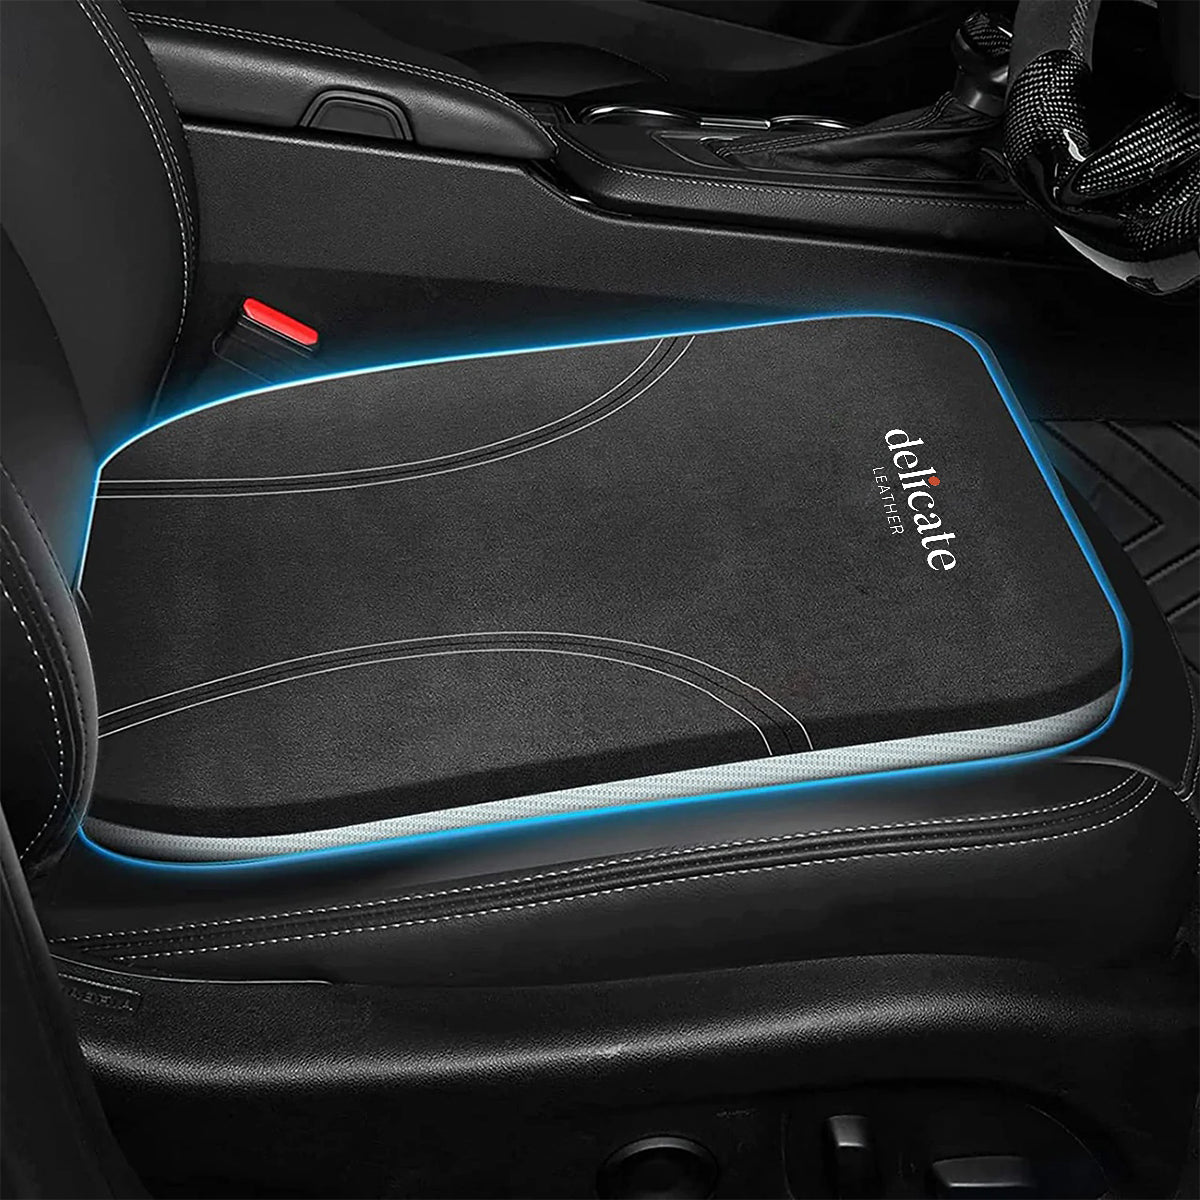 GMC Car Seat Cushion: Enhance Comfort and Support for Your Drive